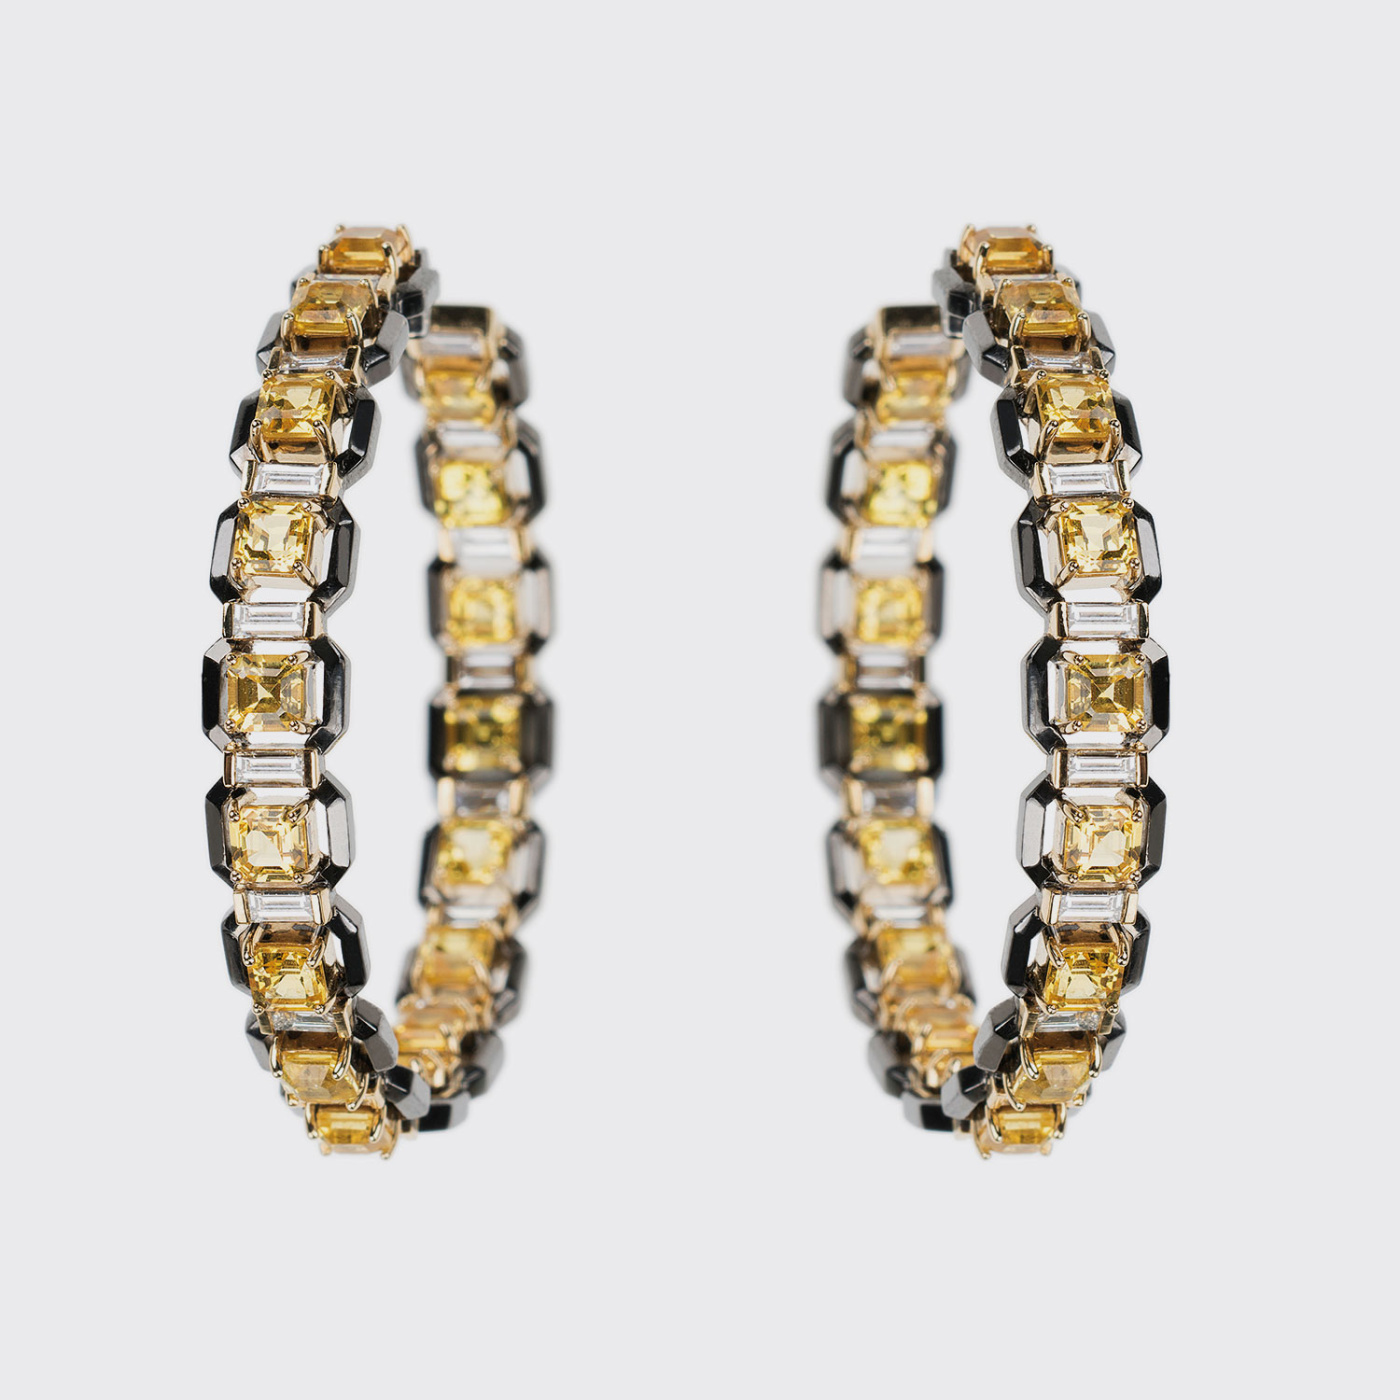 Yellow and black gold hoop earrings with yellow sapphires and white diamonds